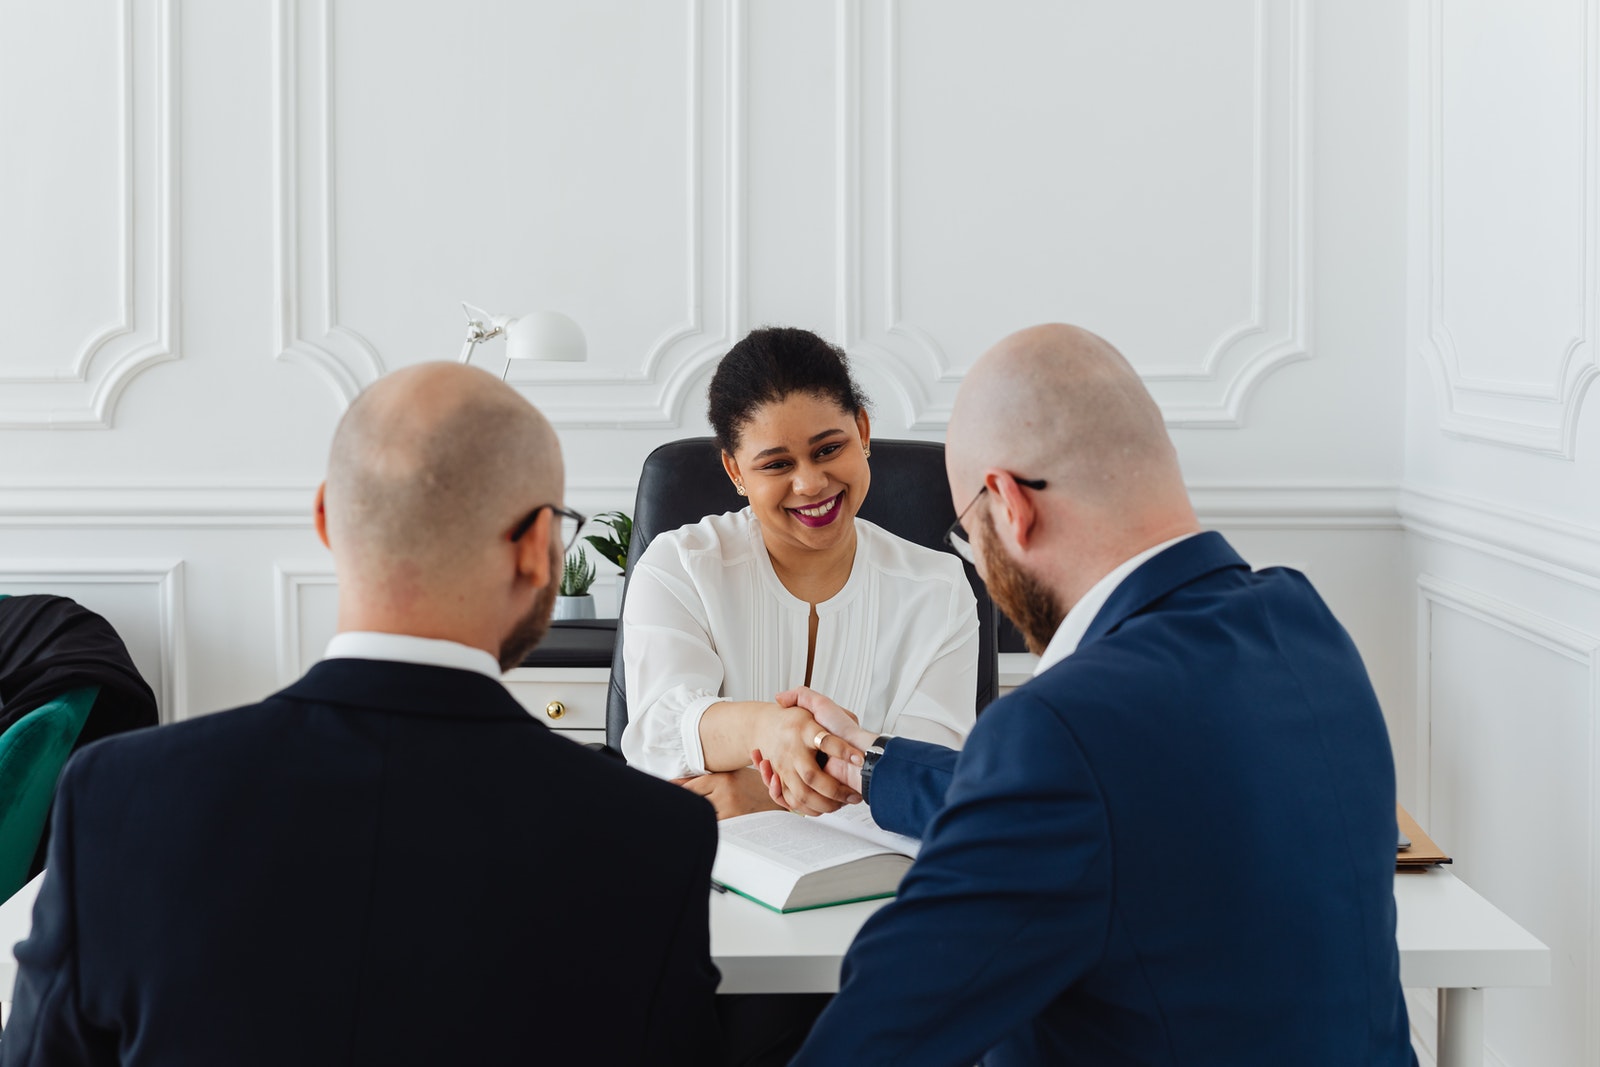 A female lawyer meets with two marketing agency representatives